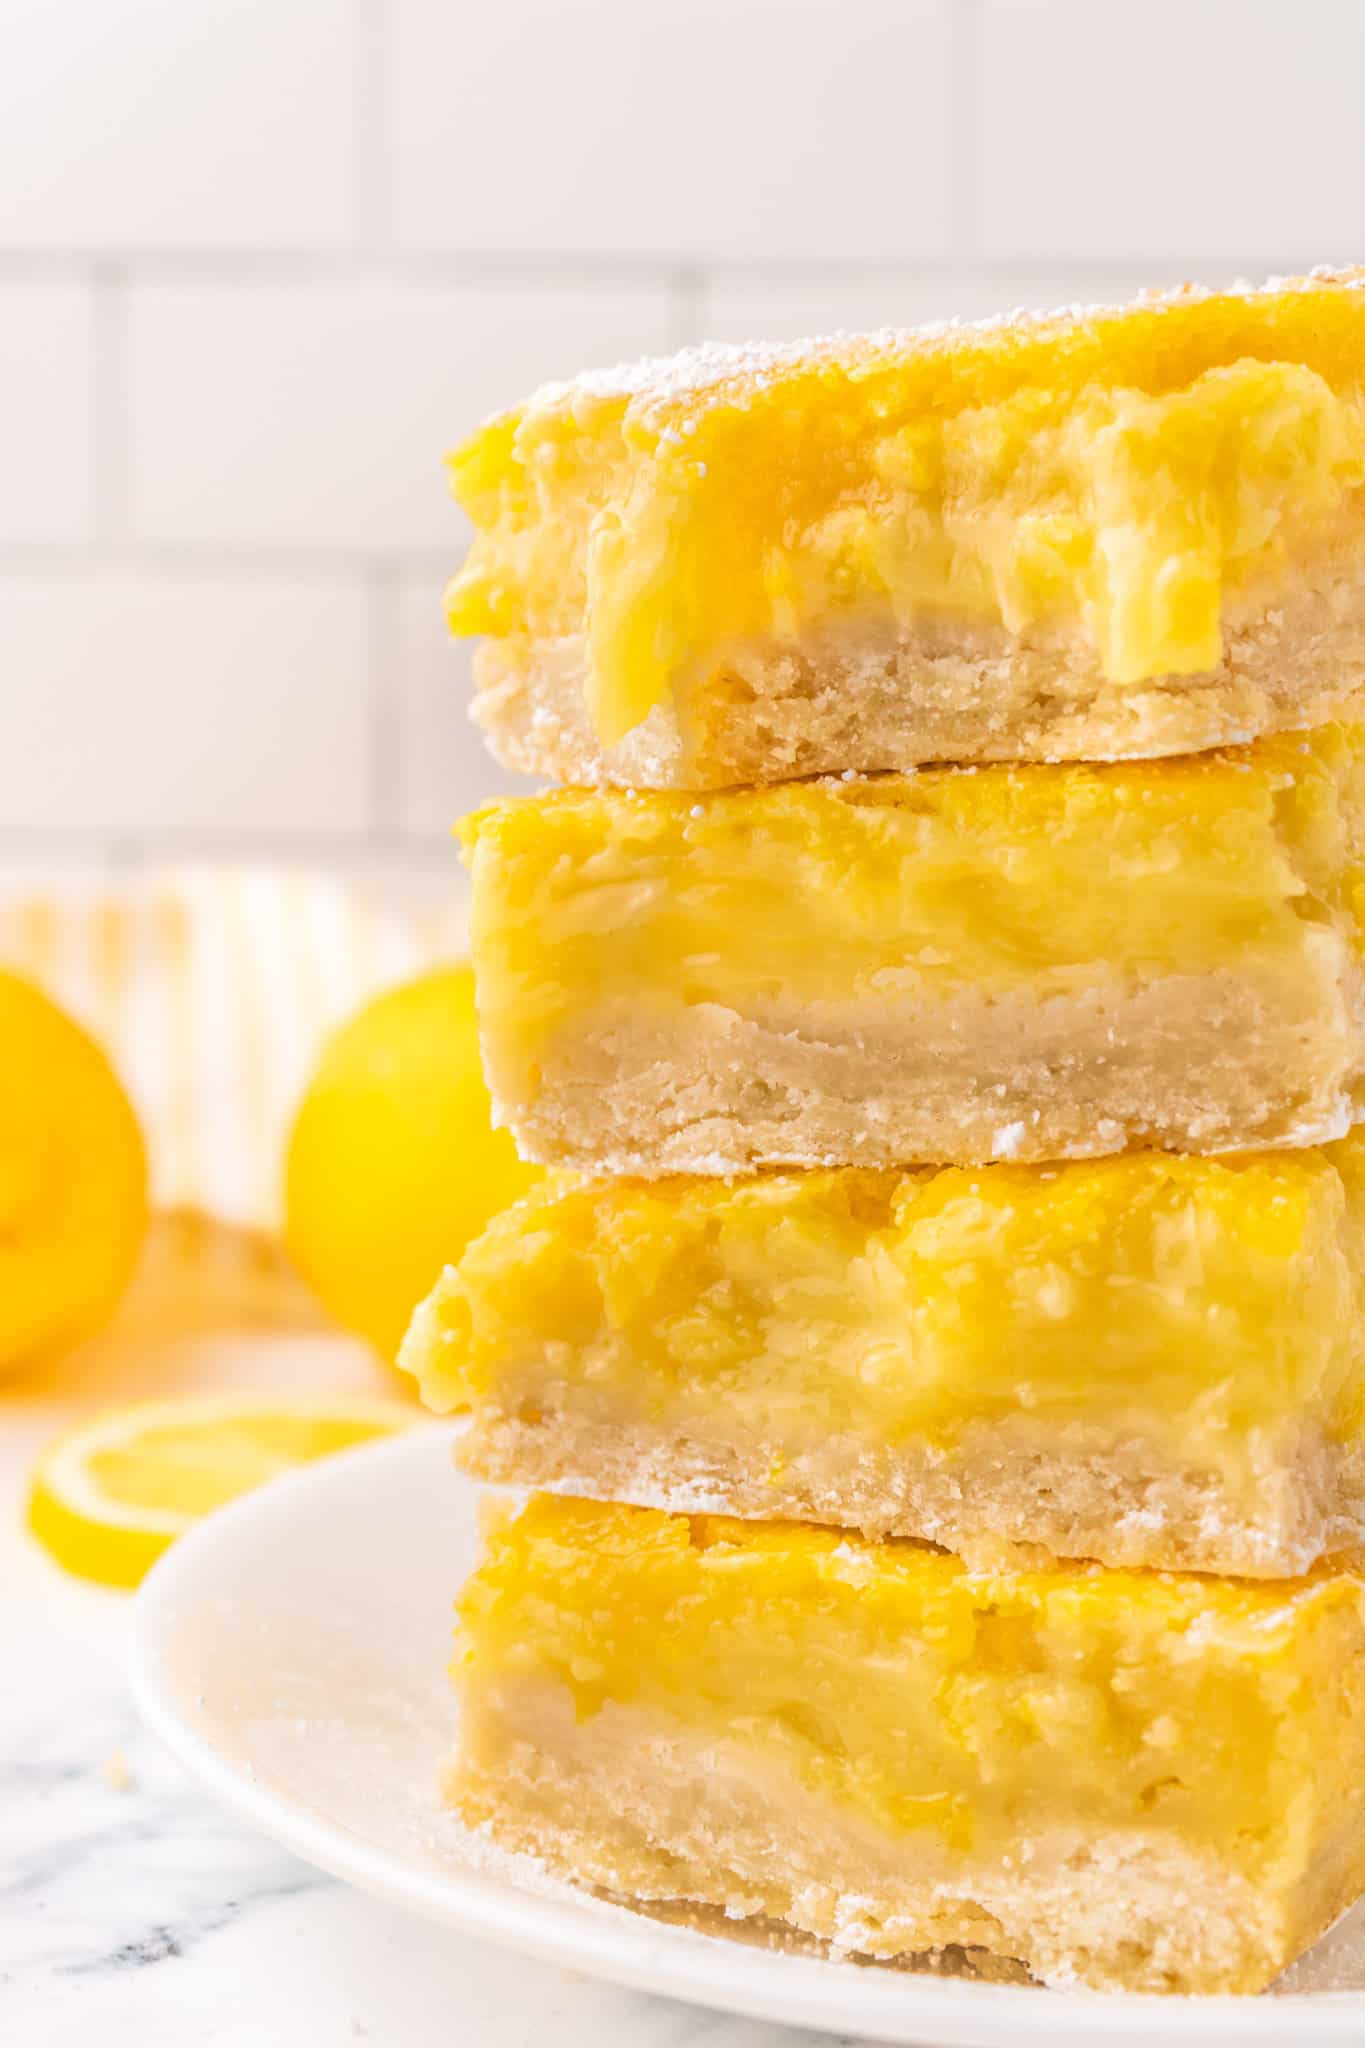 Lemon Bars are a decadent dessert with a shortbread like base topped with a smooth, rich lemon layer.